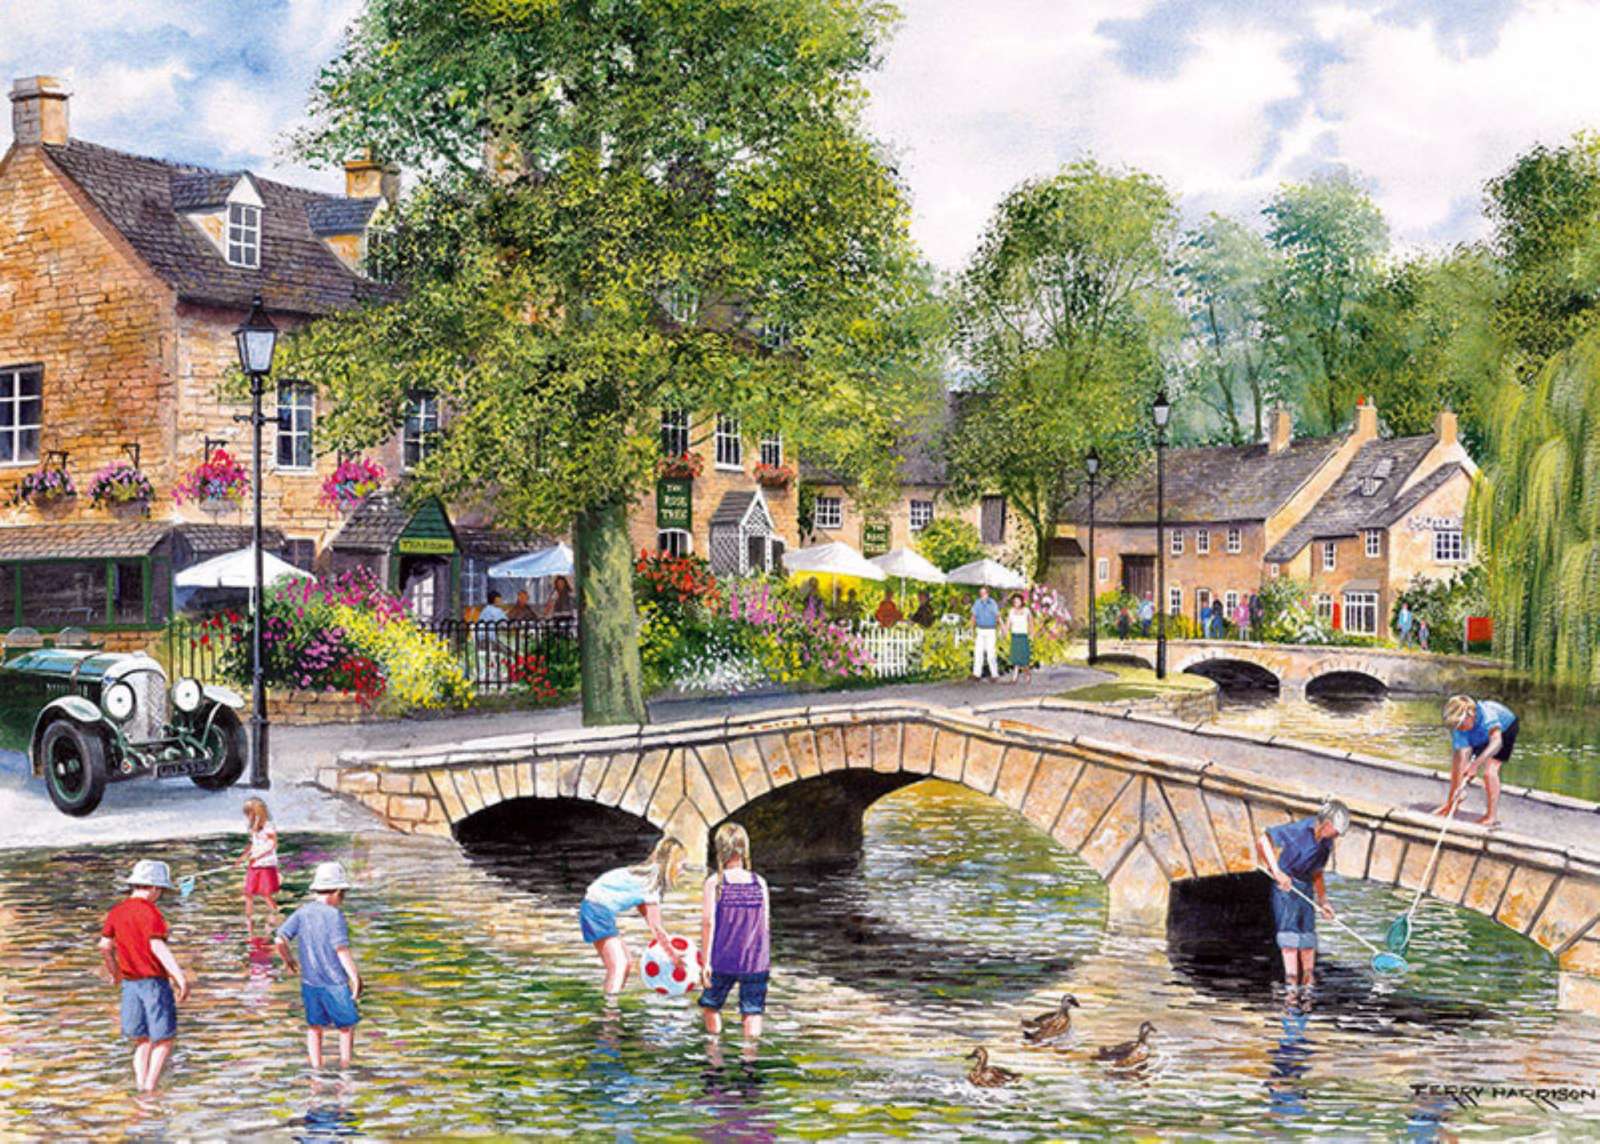 Bourton on the Water - a village in England jigsaw puzzle online